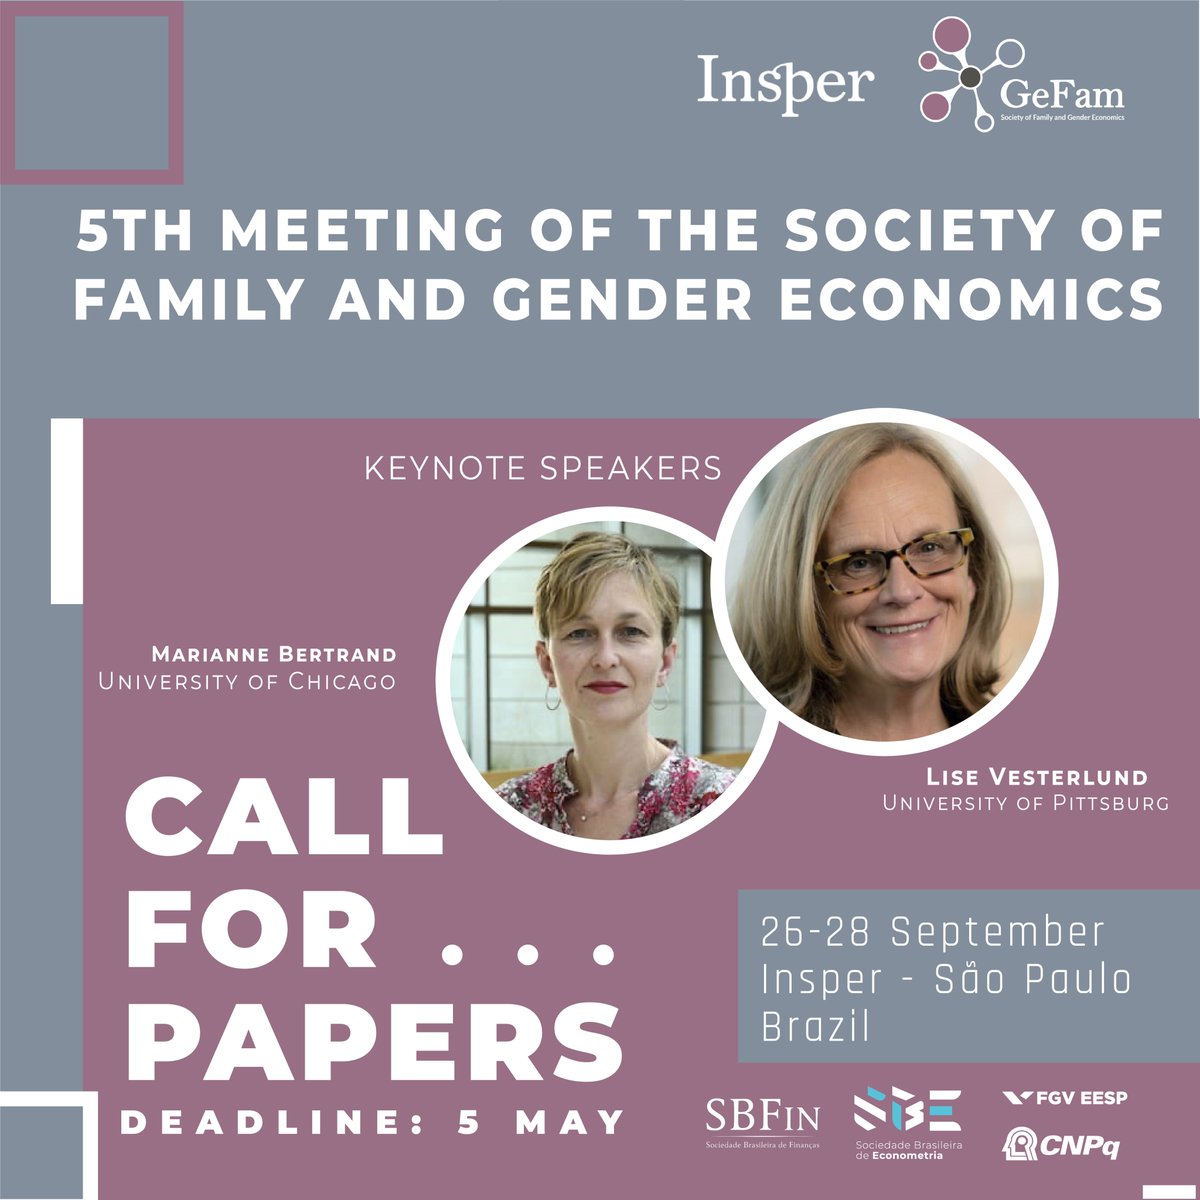 📢 Join us for the 5th Meeting of the Society of Family and Gender Economics! We're seeking innovative and impactful papers that explore the dynamics of family and gender economics. Whether you're an established scholar or a promising new researcher, we want to hear from you!